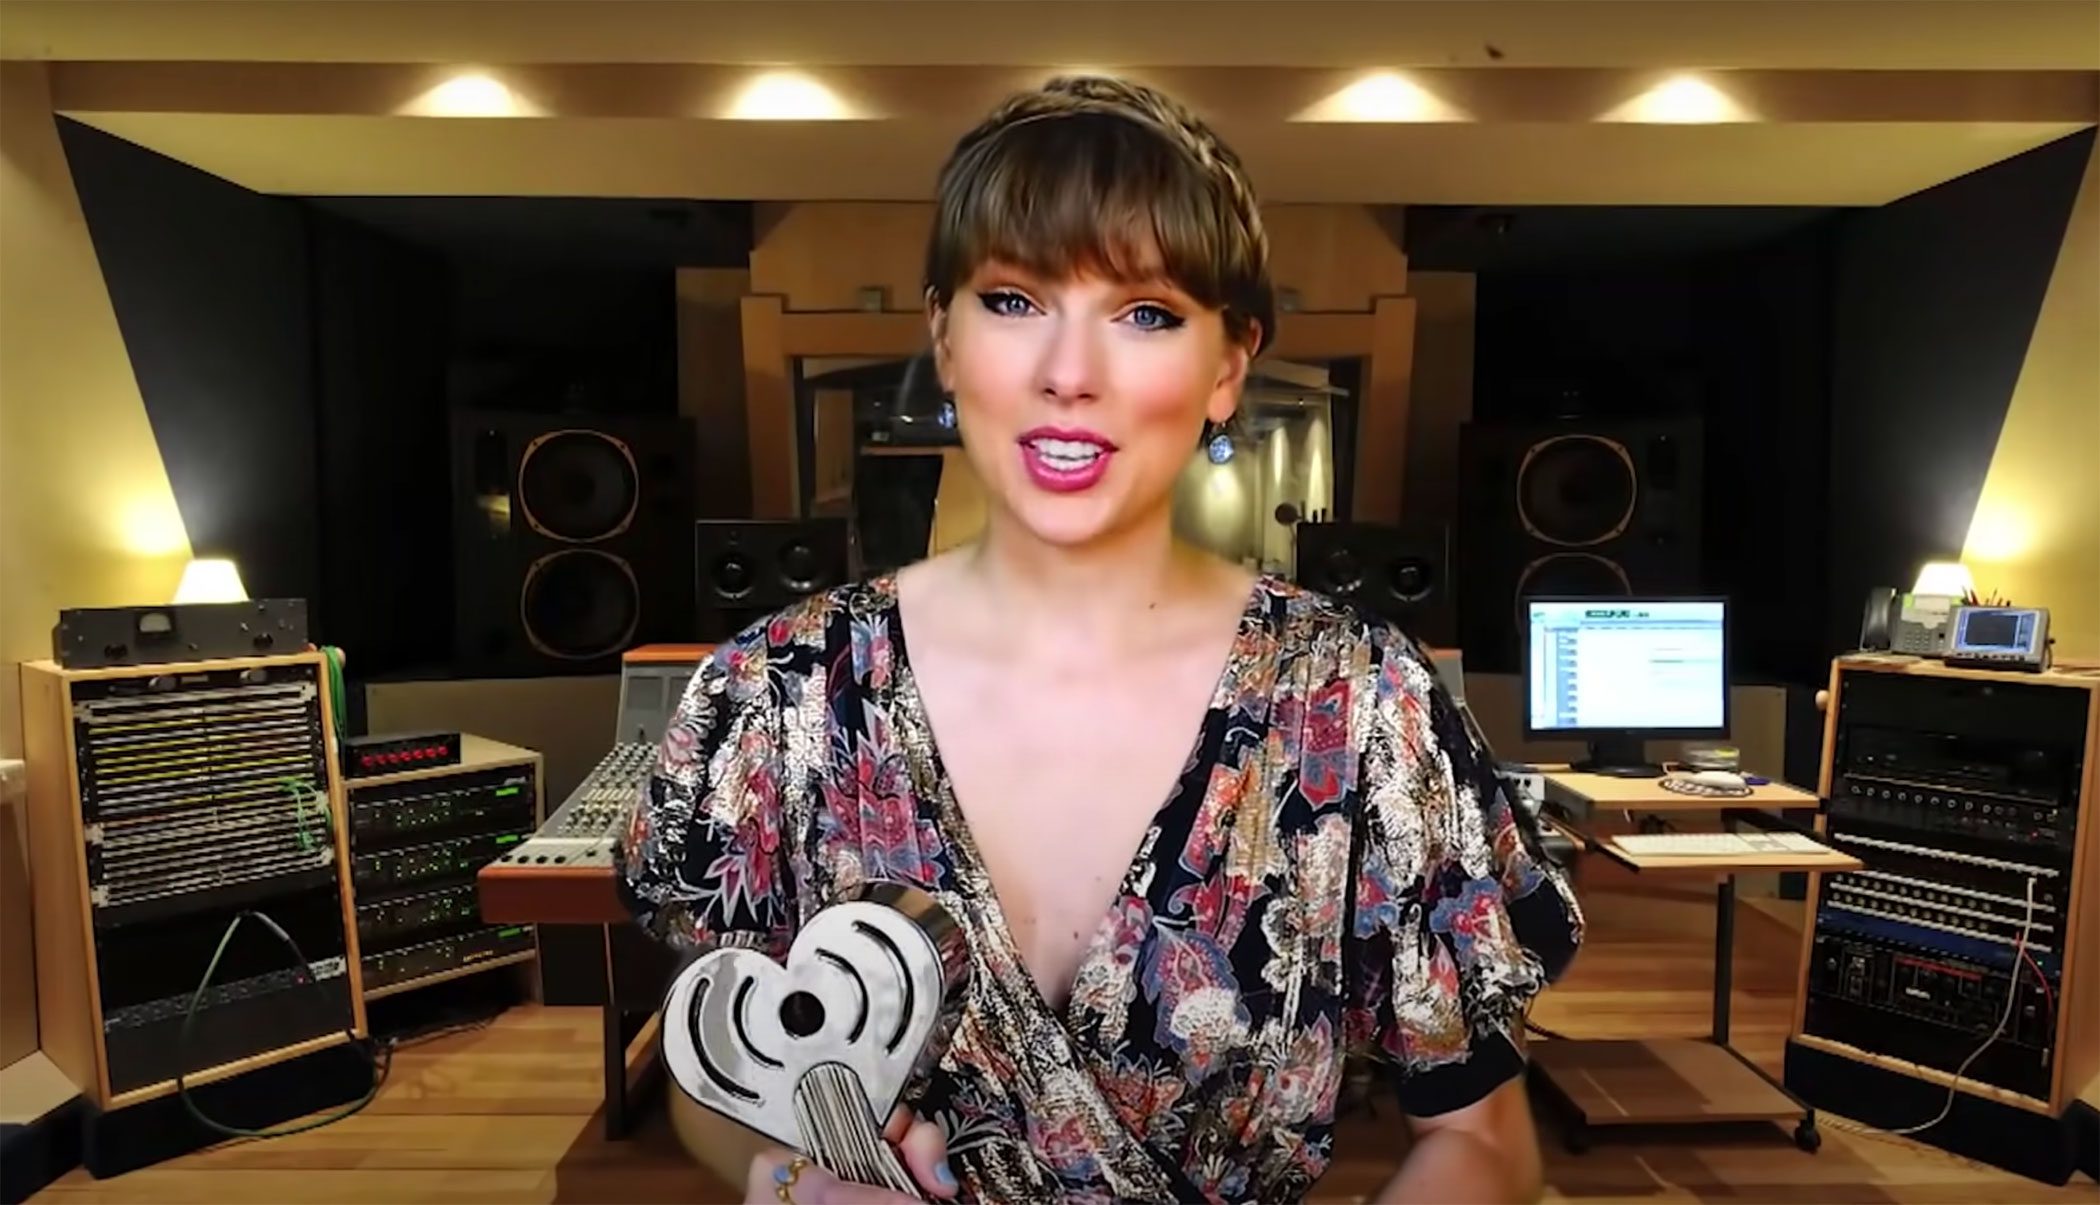 Taylor Swift Is A Proven Music Icon. Why Are Men Like Damon Albarn Still Doubting Her Success?